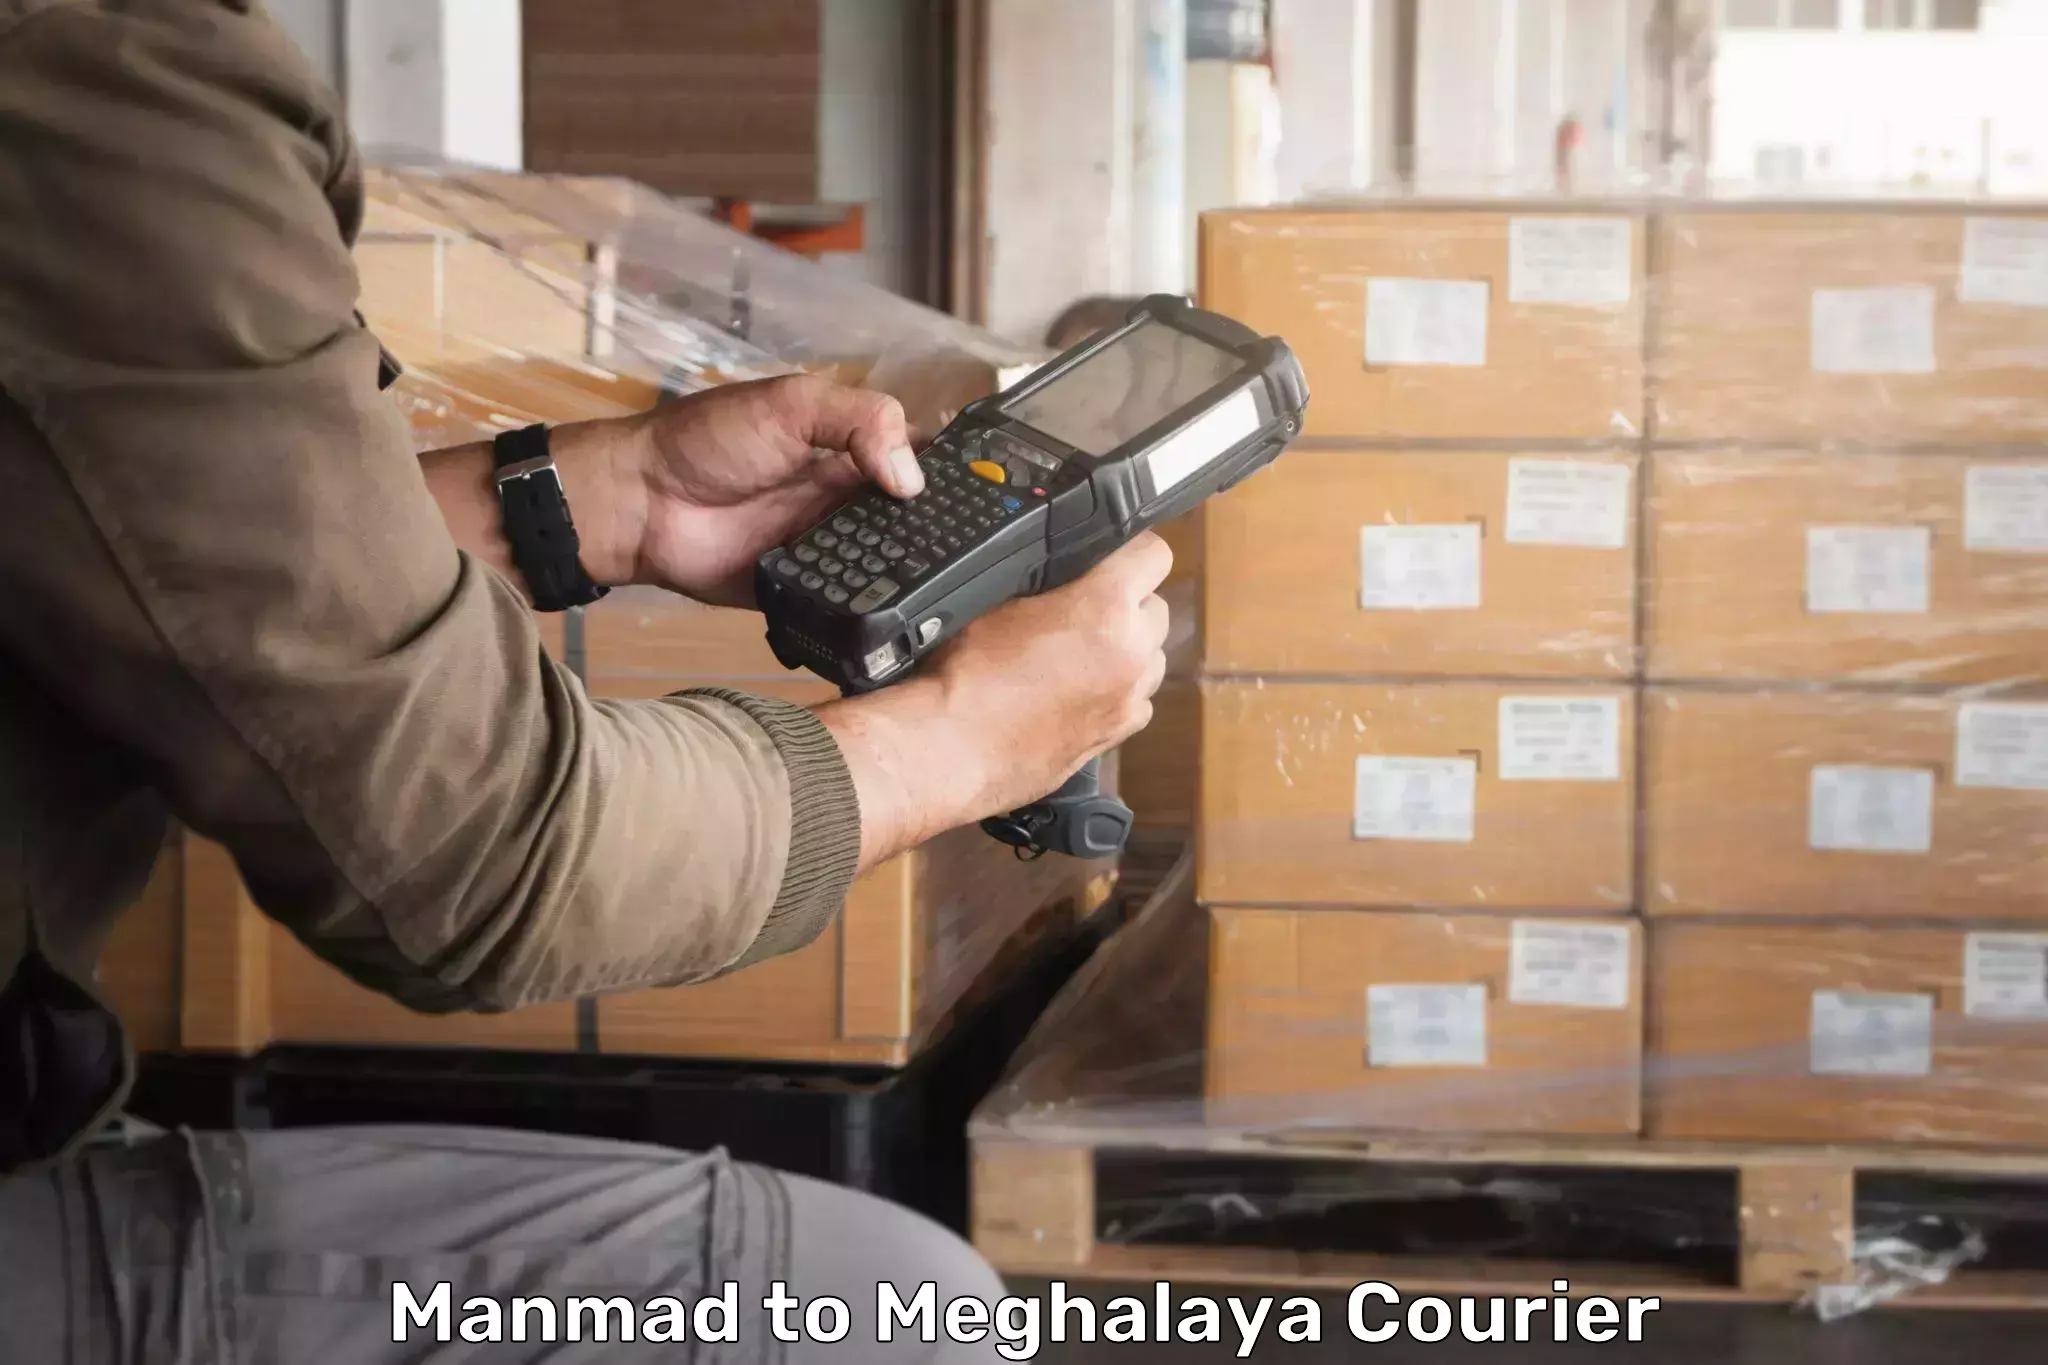 State-of-the-art courier technology Manmad to Meghalaya